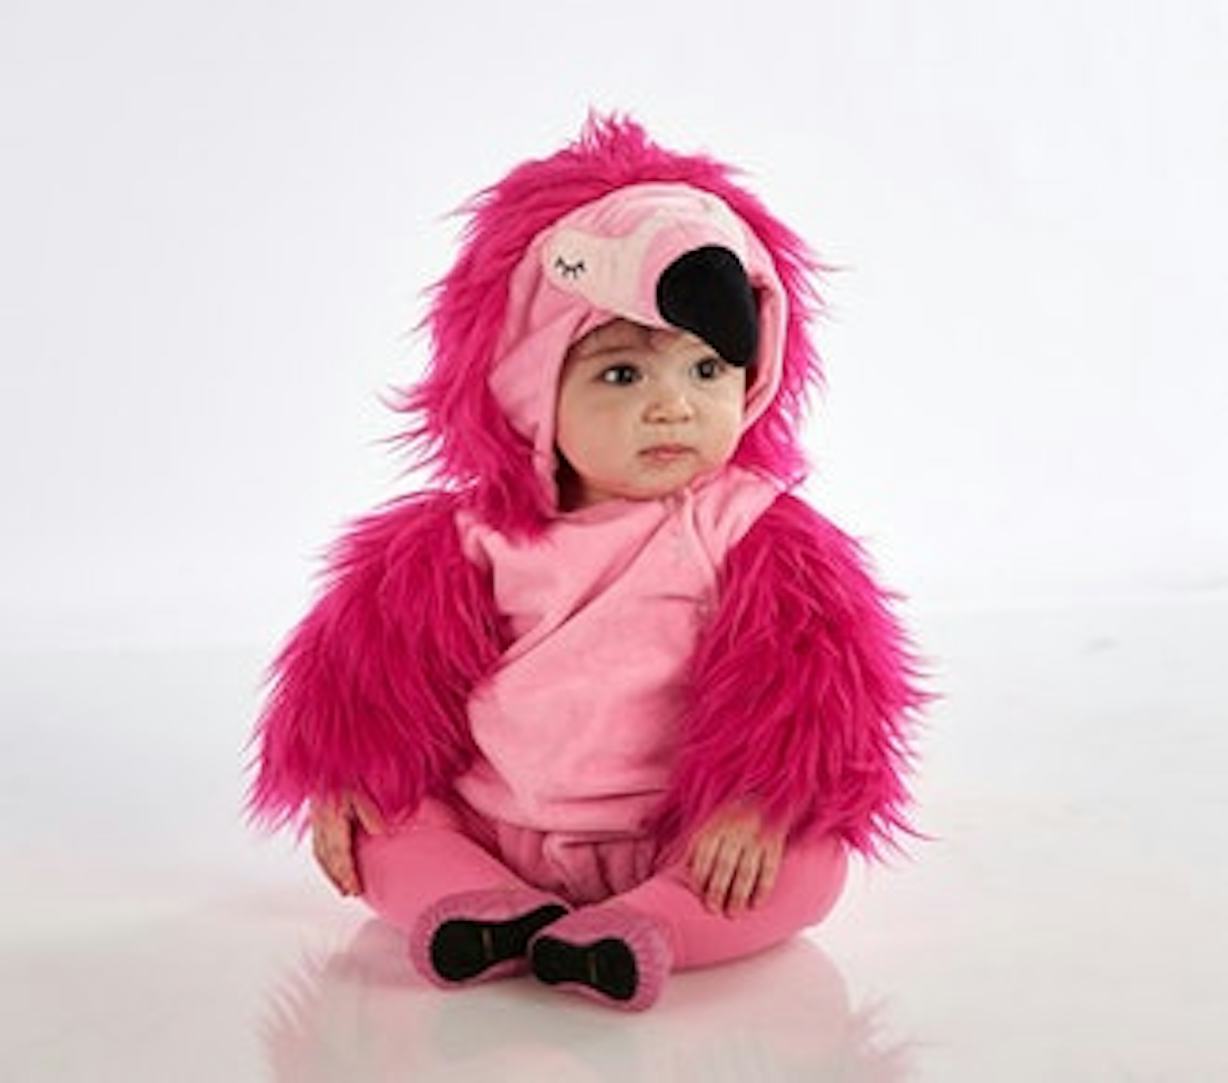 18 Cutest Baby Girl Halloween Costumes For Every Style & Budget